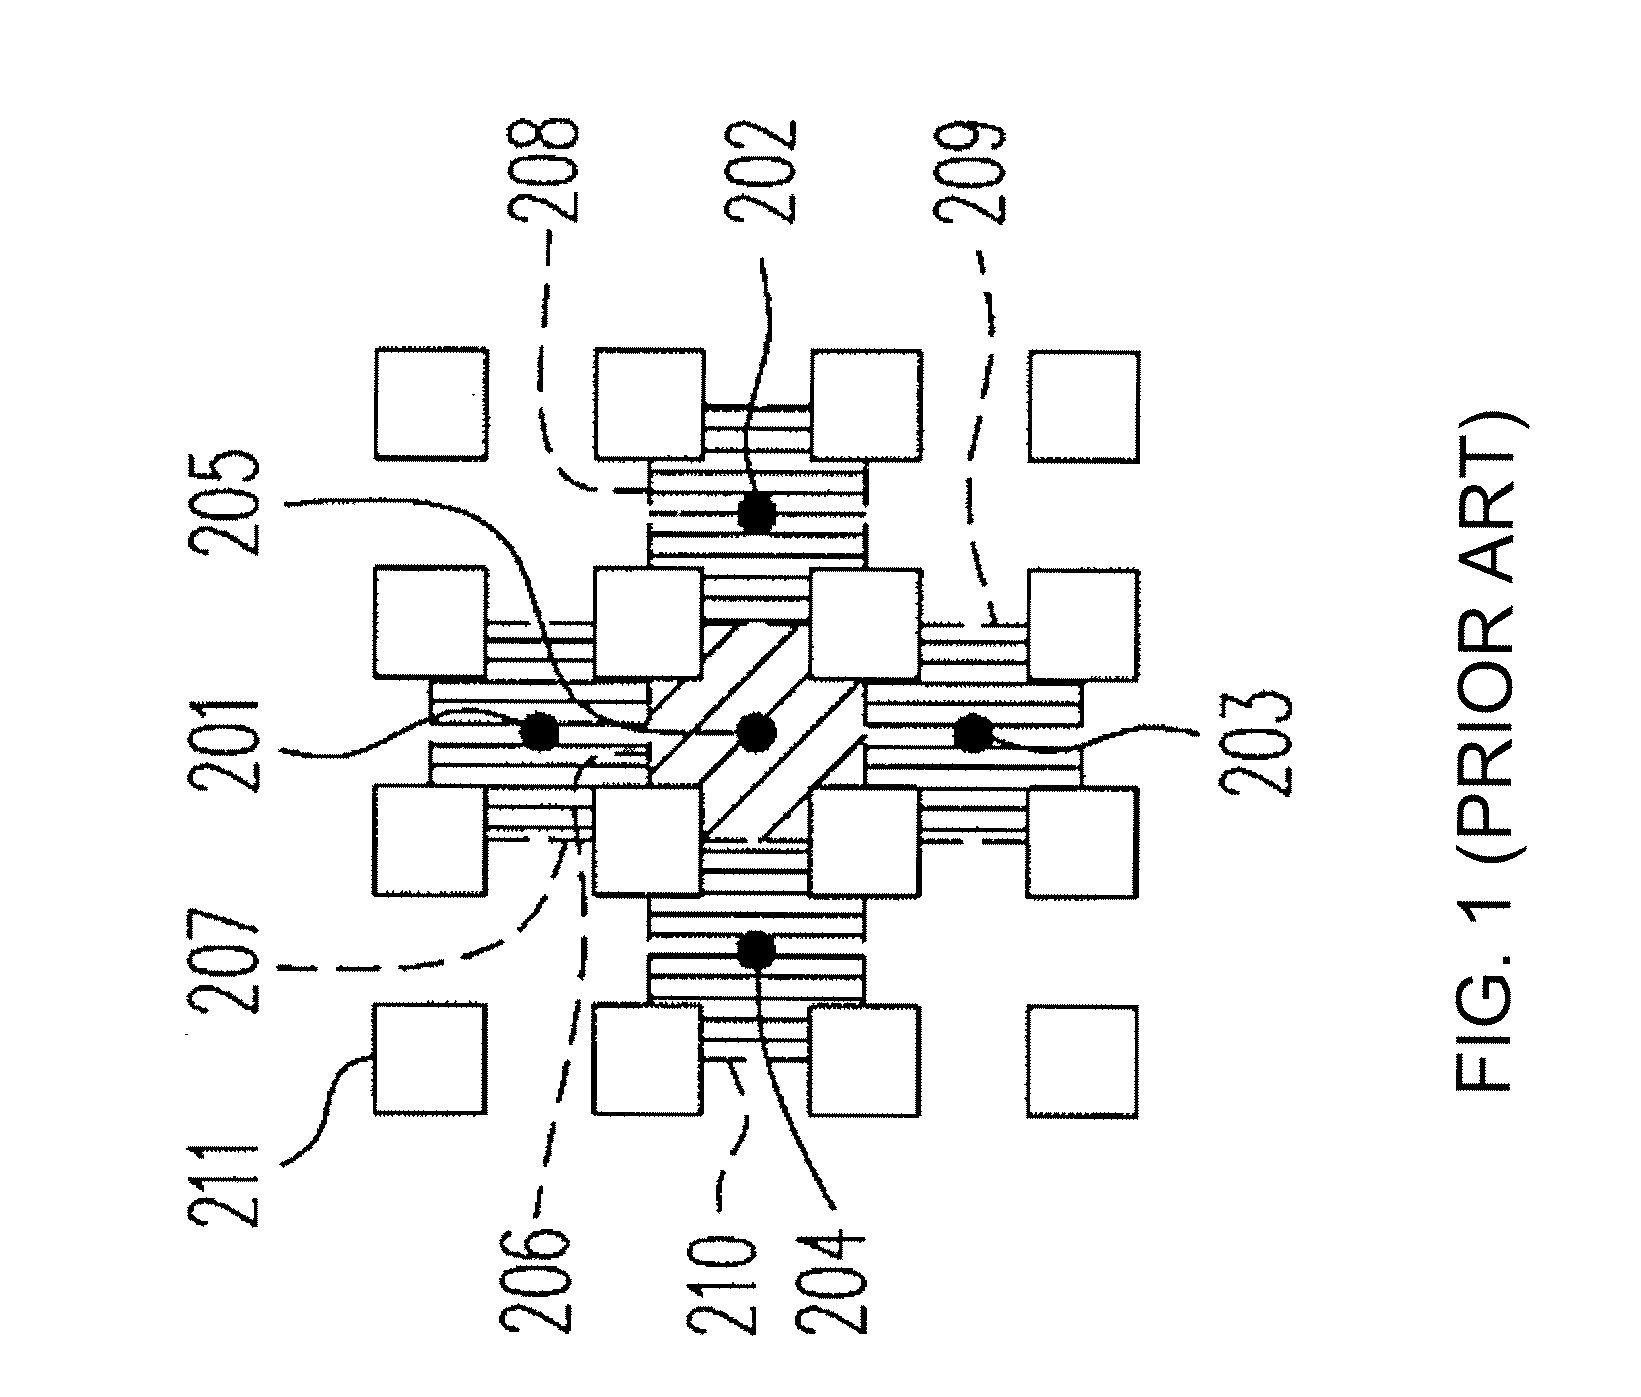 Scheduling methods and systems for multi-hop relay in wireless communications